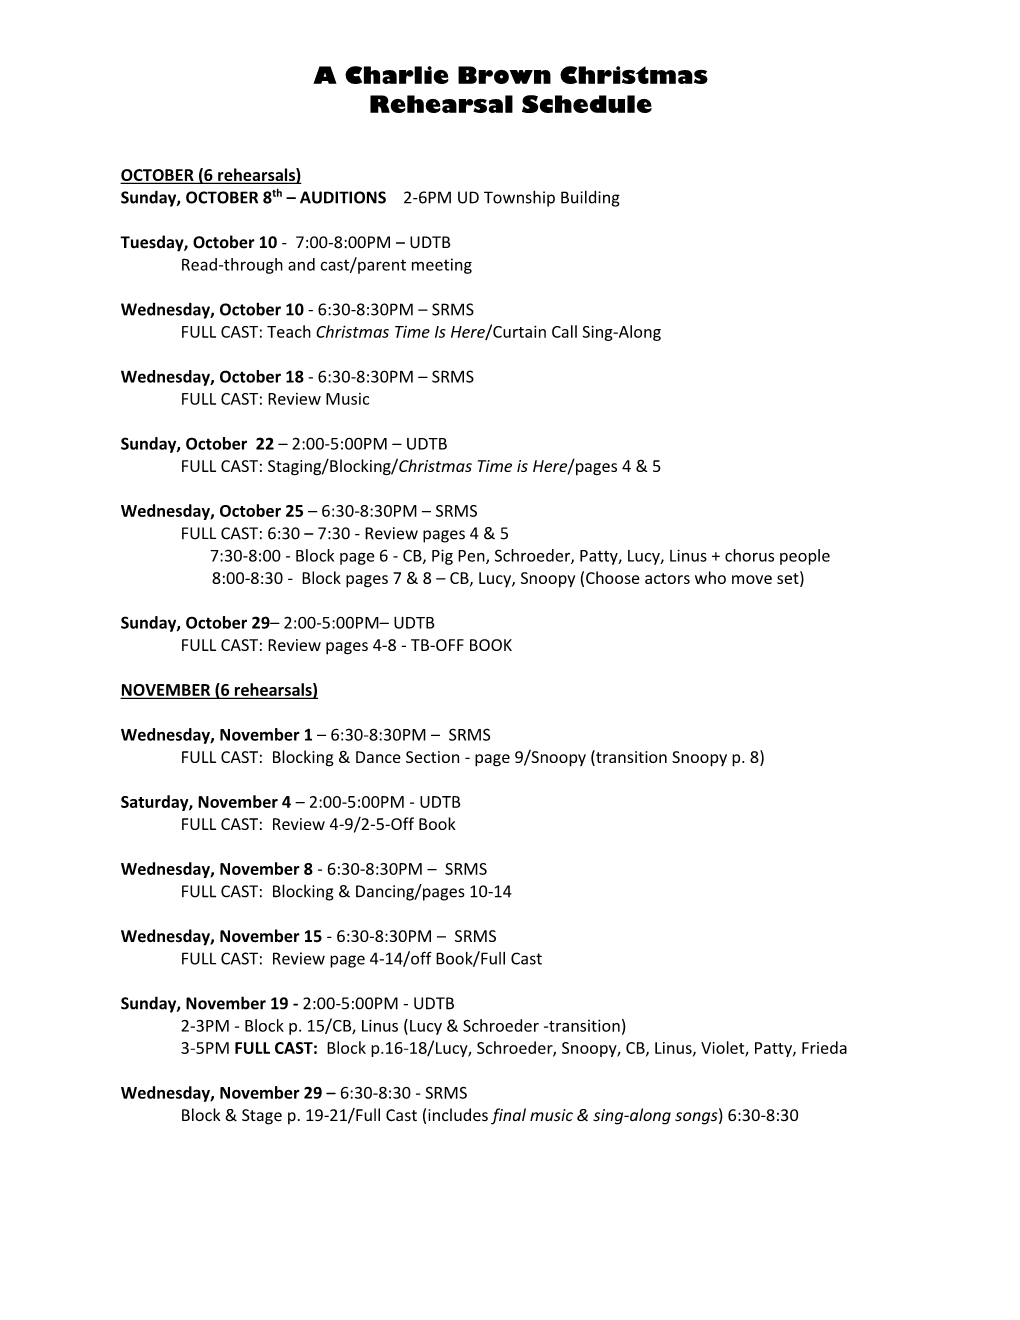 A Charlie Brown Christmas Rehearsal Schedule